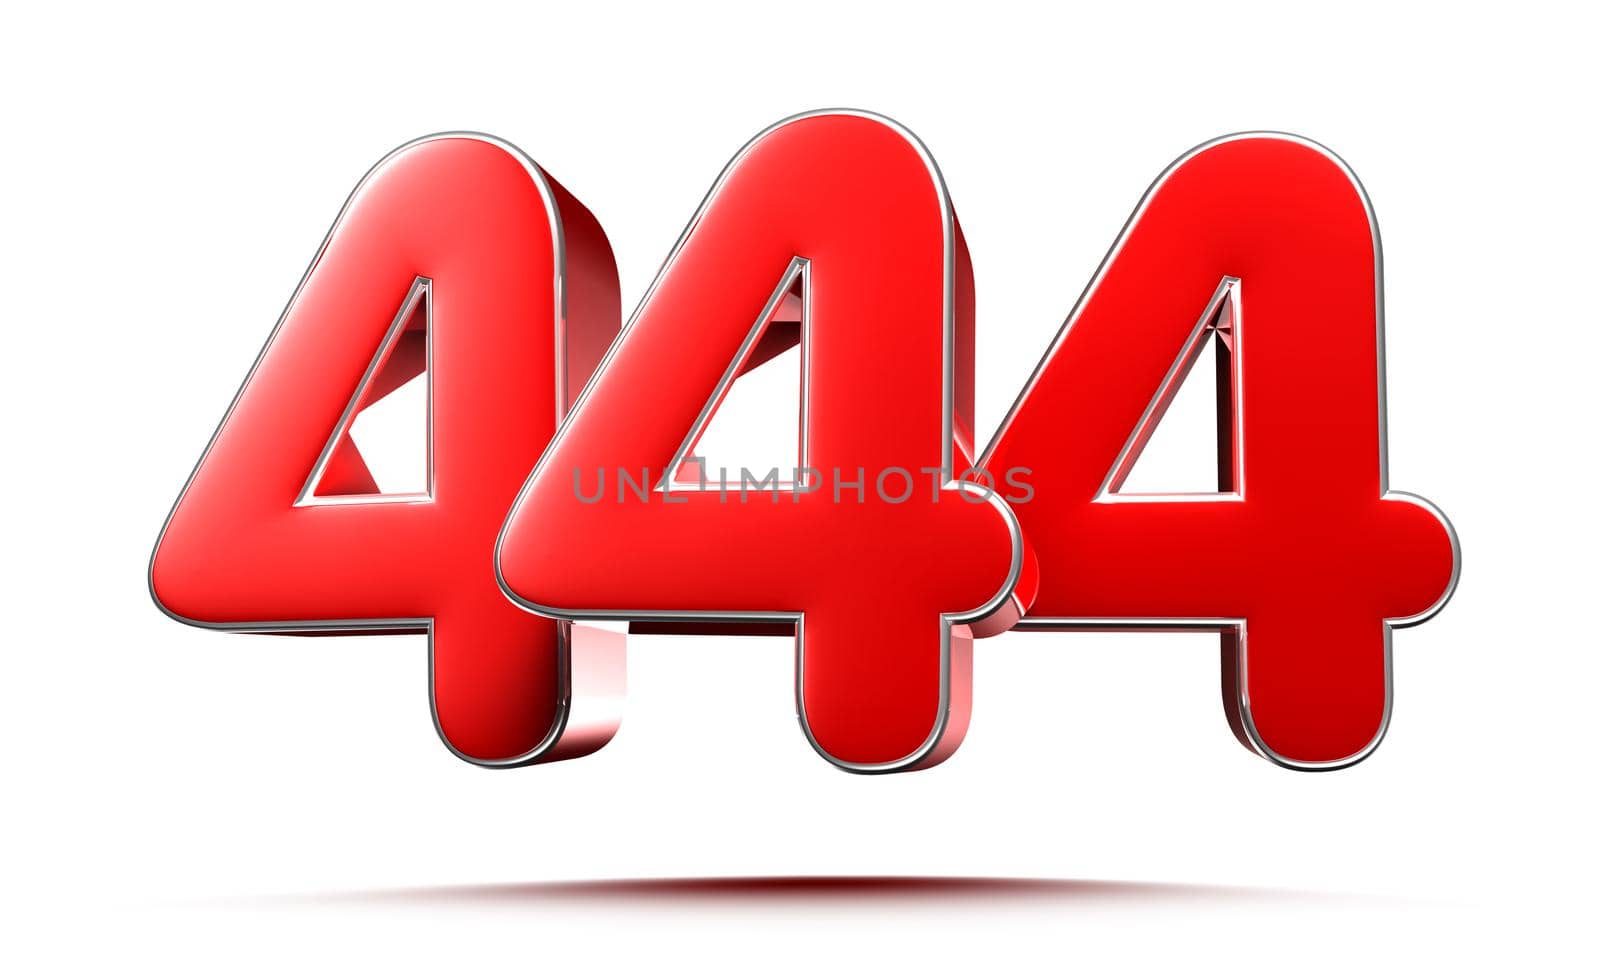 Rounded red numbers 444 on white background 3D illustration with clipping path